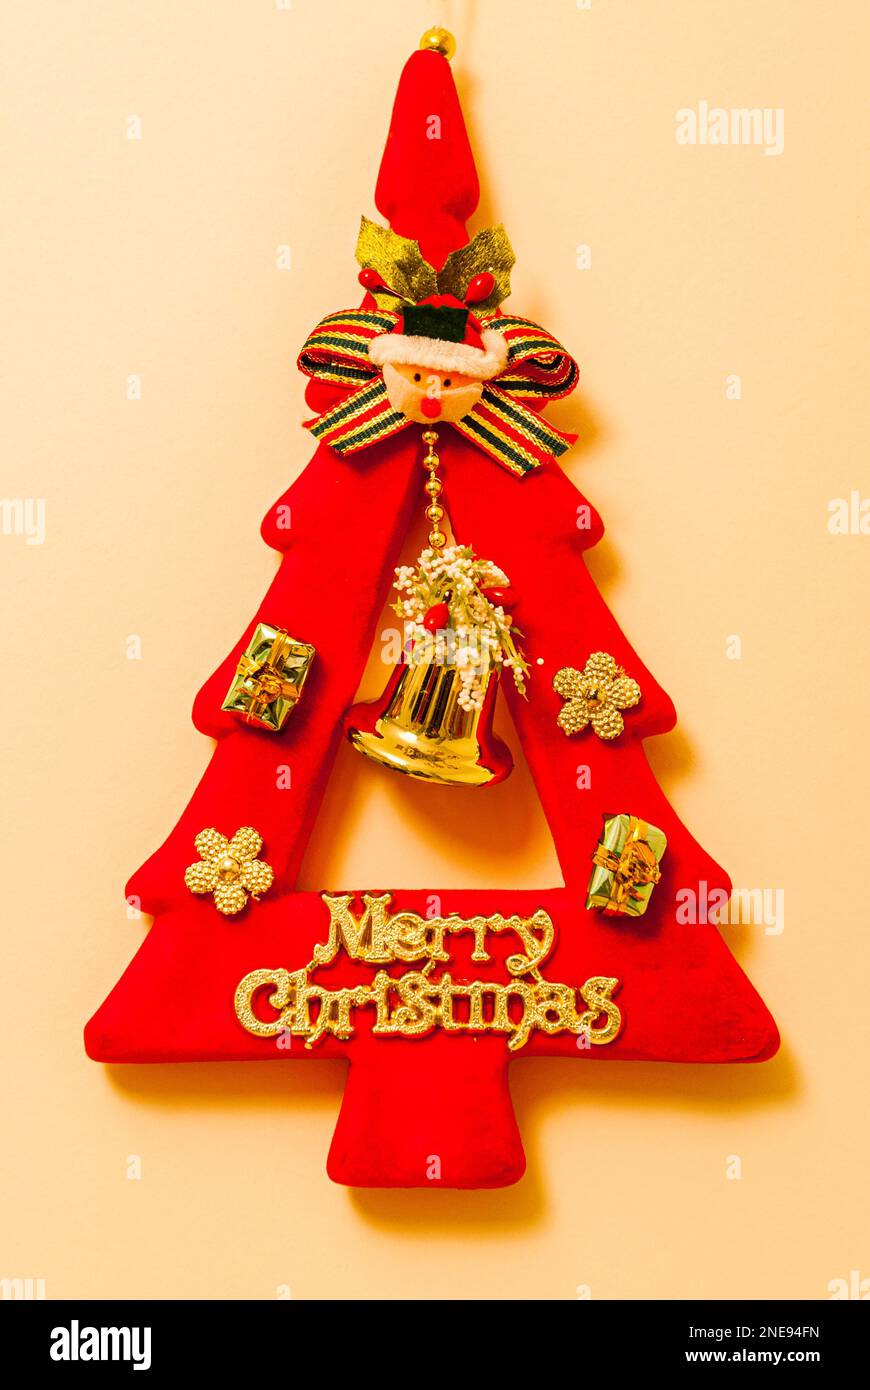 Red and gold Christmas tree shaped decoration. Stock Photo